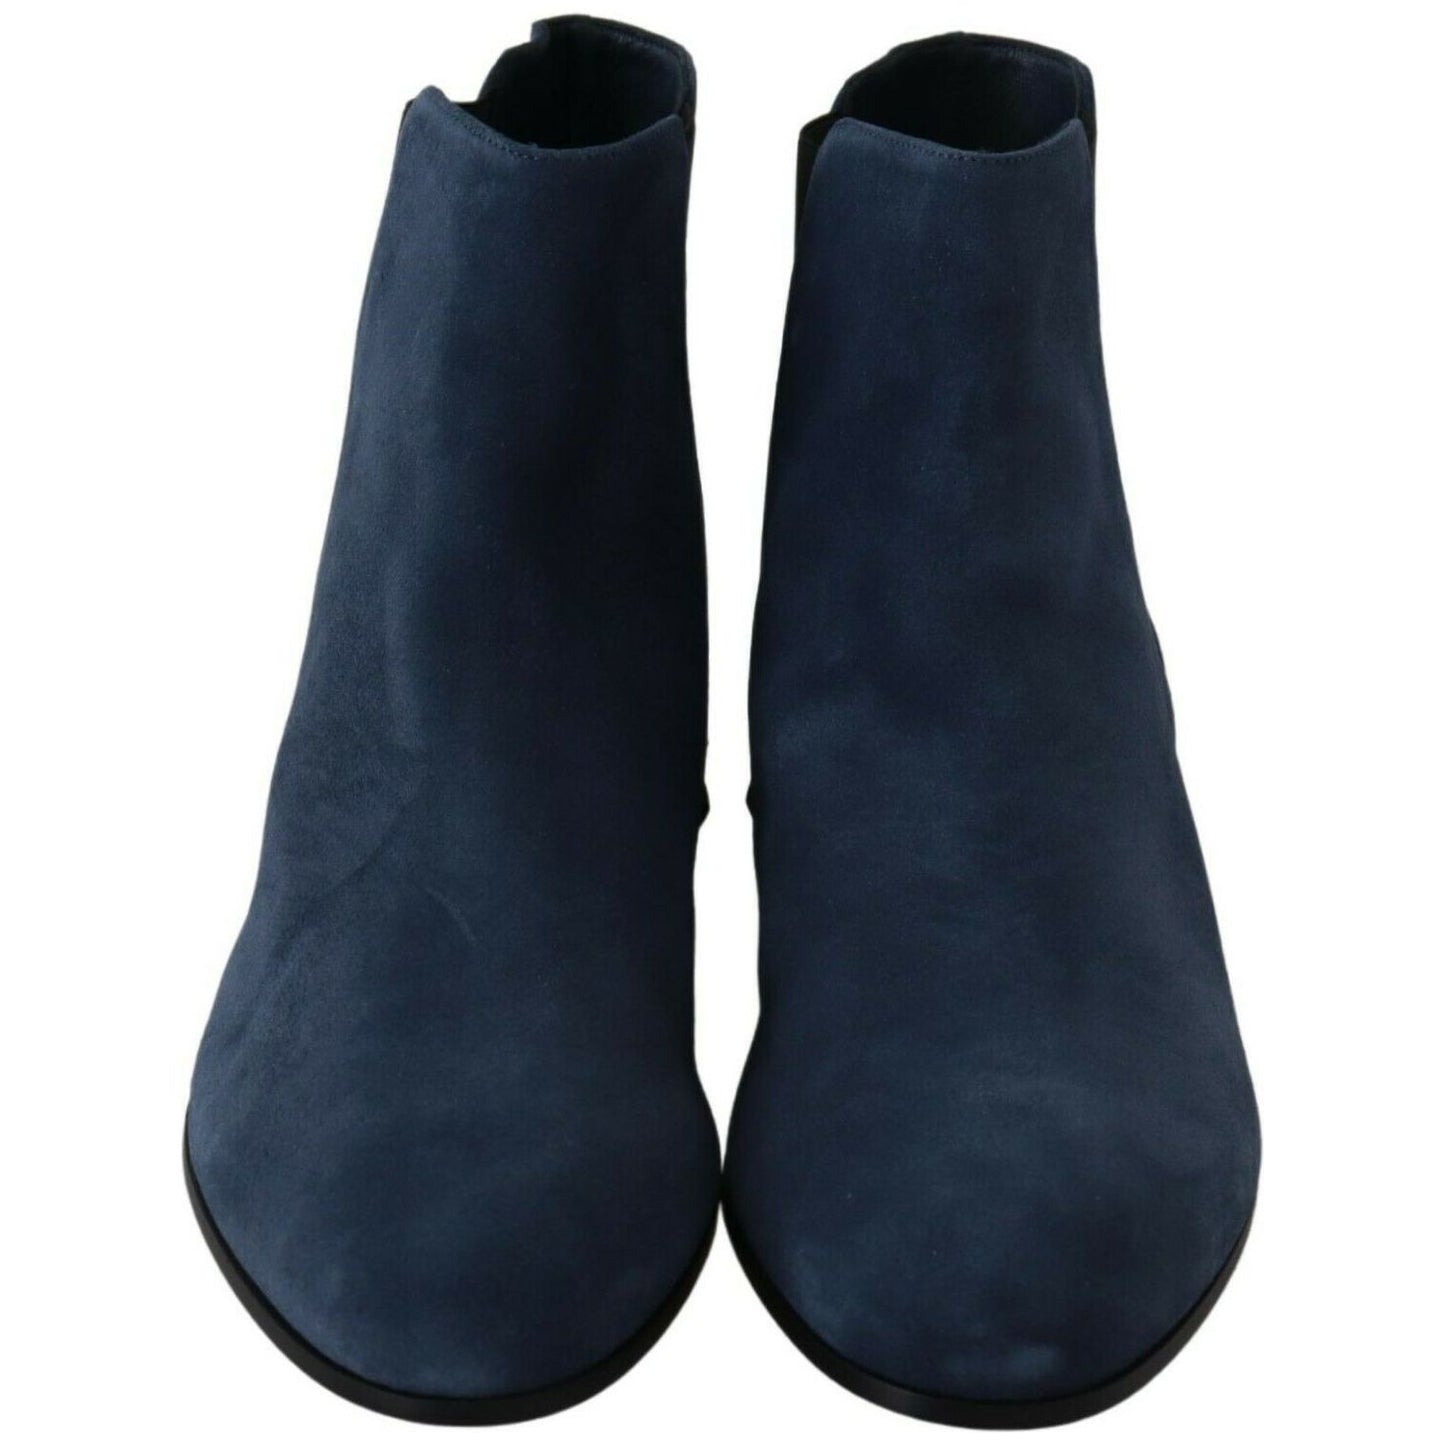 Dolce & Gabbana Chic Blue Suede Mid-Calf Boots with Stud Details blue-suede-embellished-studded-boots-shoes WOMAN BOOTS s-l1600-2022-06-30T120604.422-19892989-a06.jpg